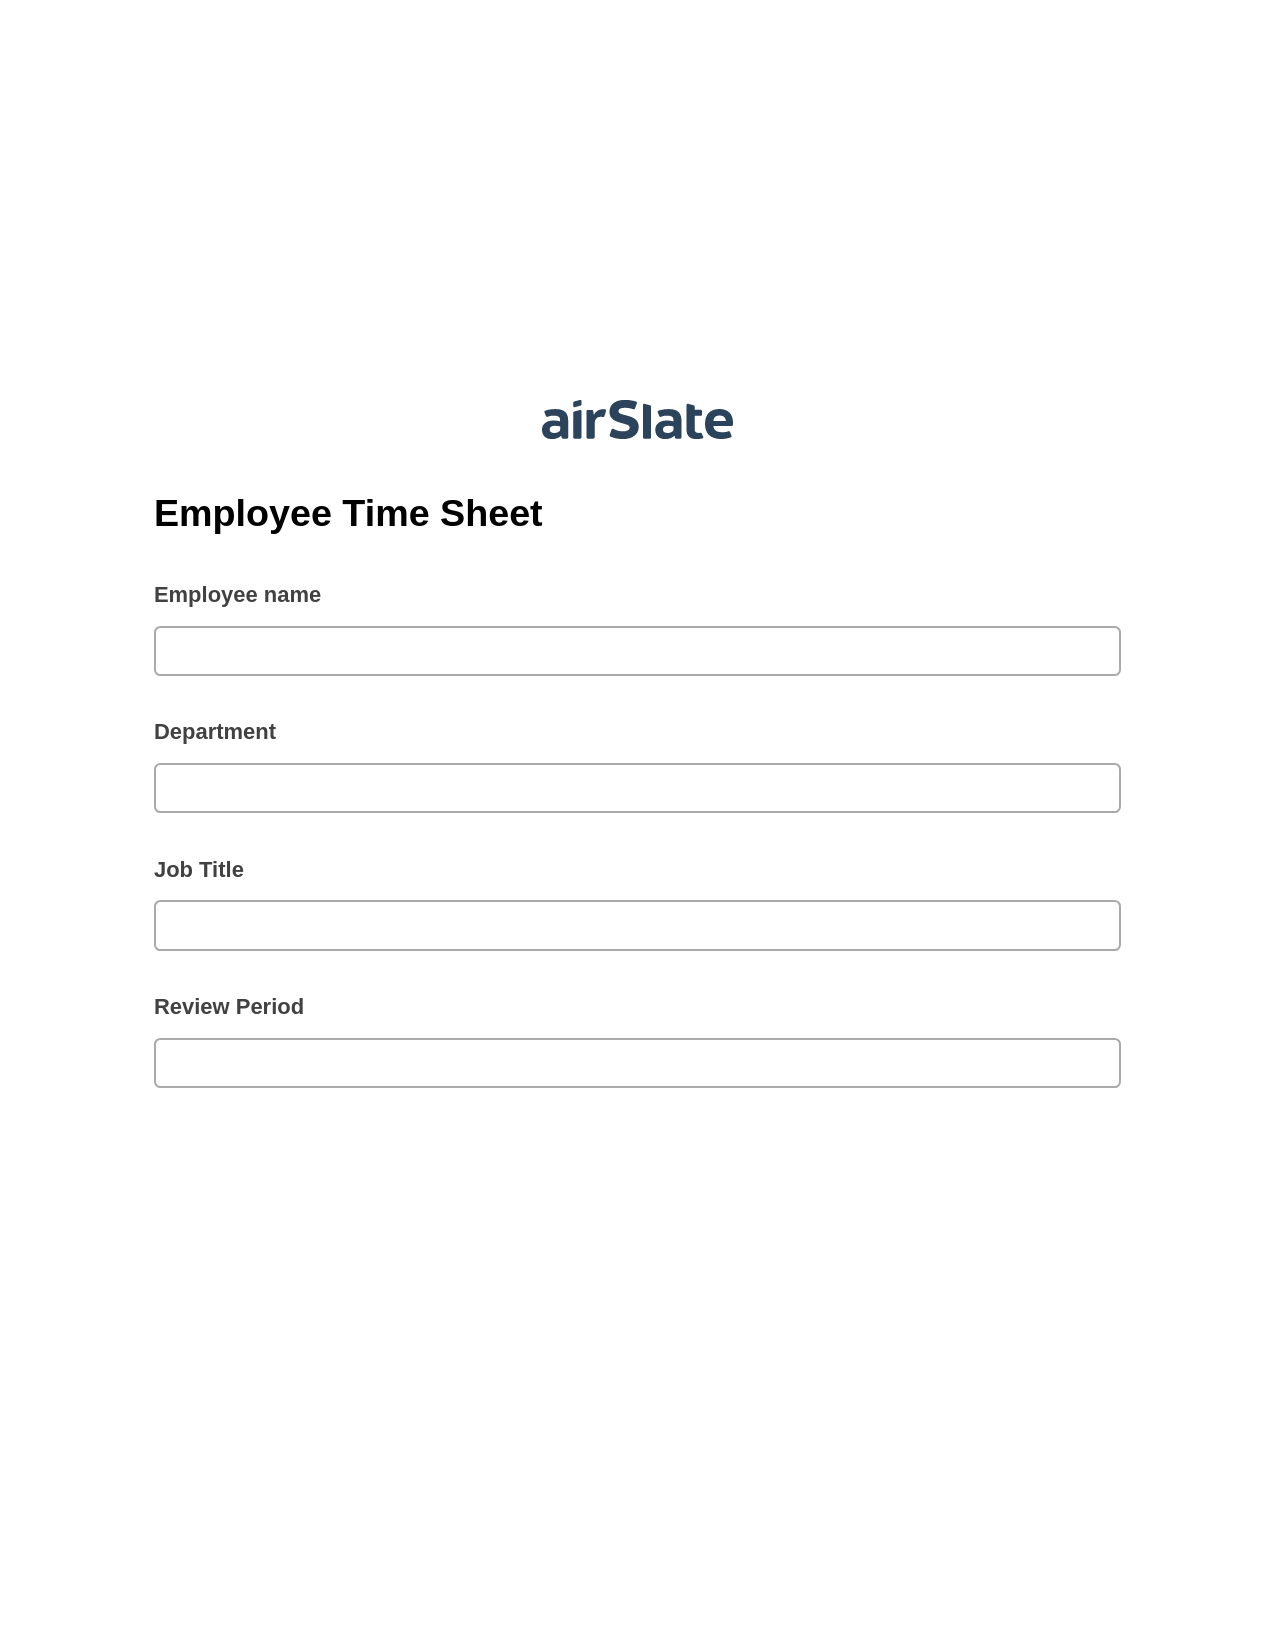 Employee Time Sheet Pre-fill Dropdowns from CSV file Bot, Create slate addon, Archive to Dropbox Bot